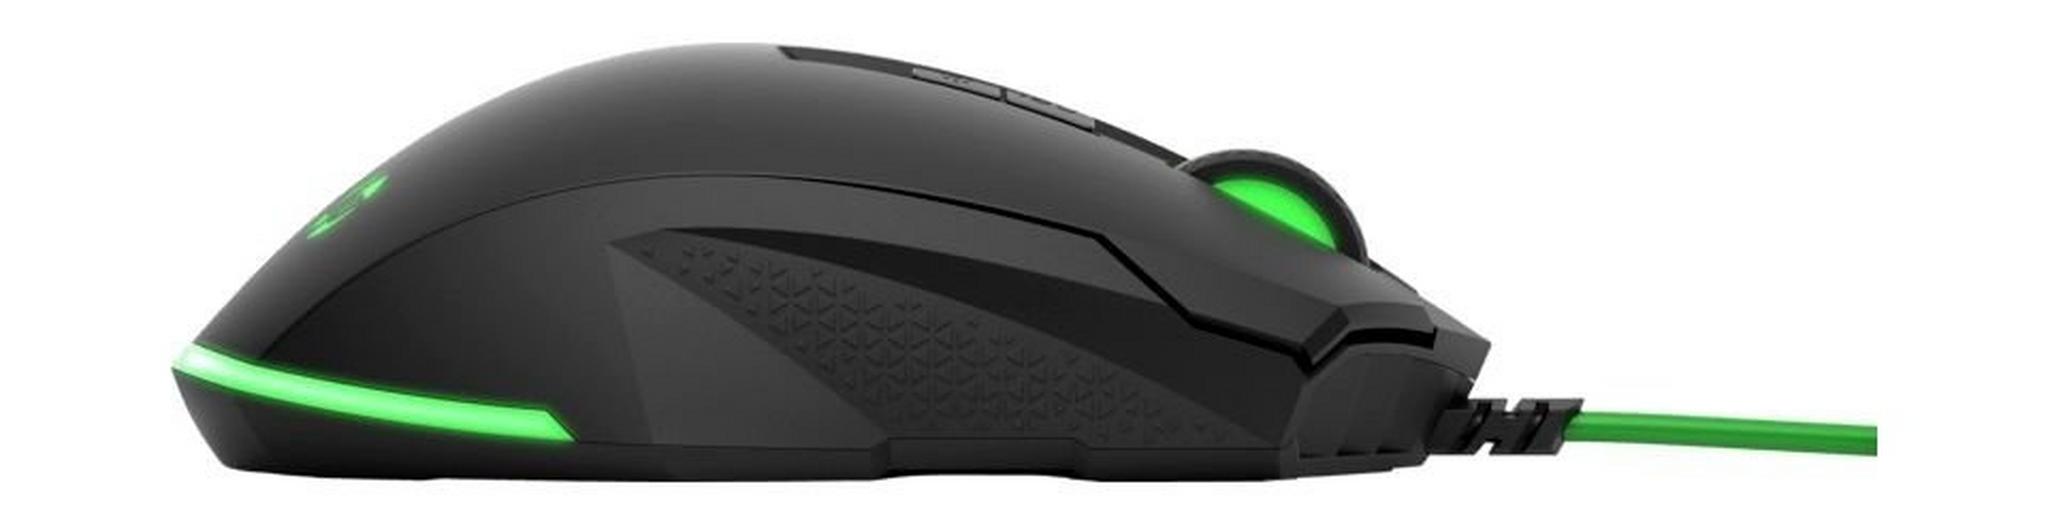 HP Pavilion Mouse 200 Wired